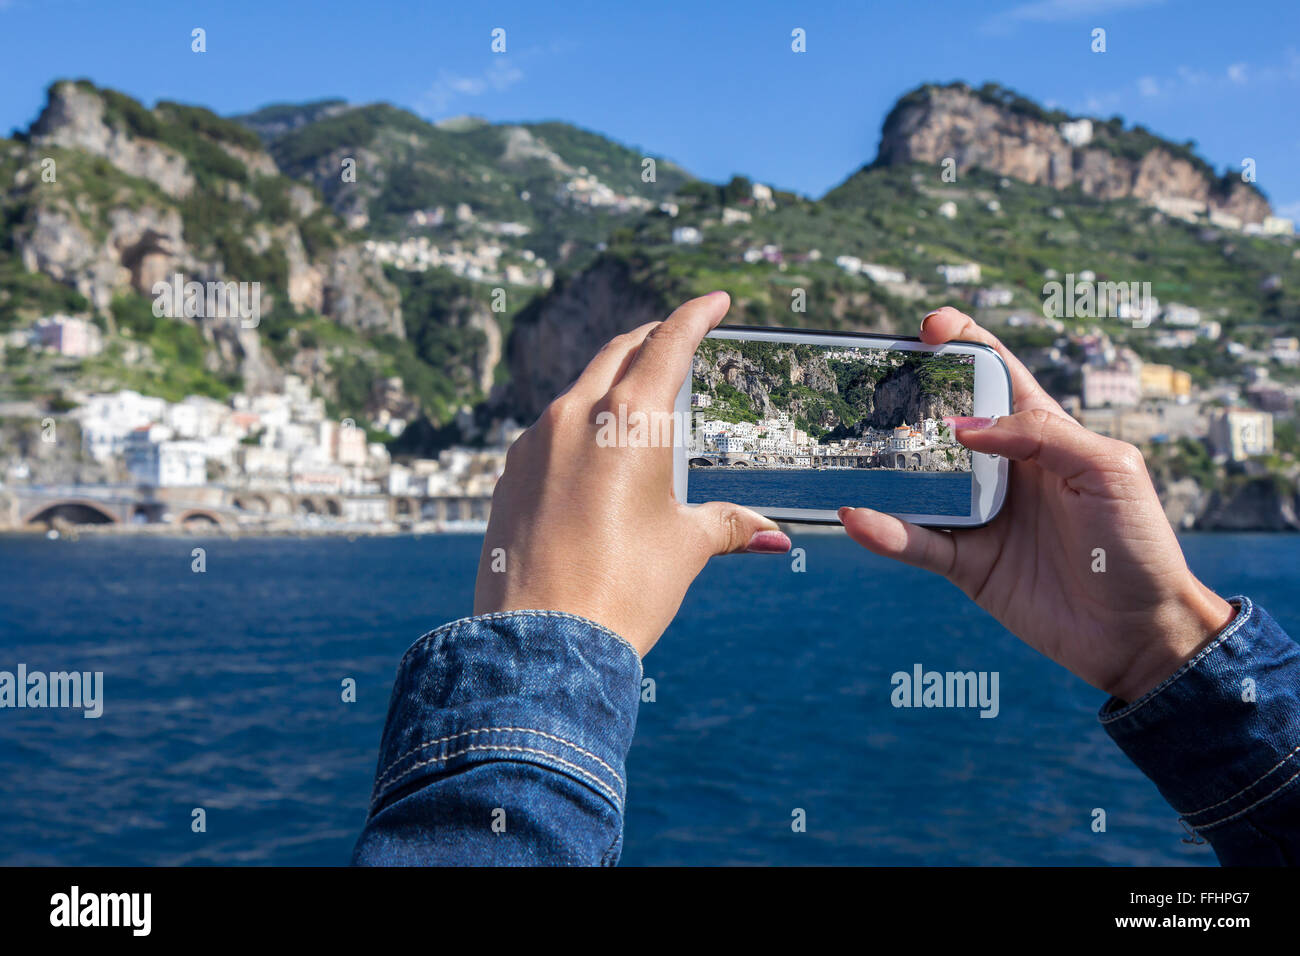 Young Girl recording pictures use cellphone, of Atrani at famous Amalfi Coast, Campania, Italy Stock Photo